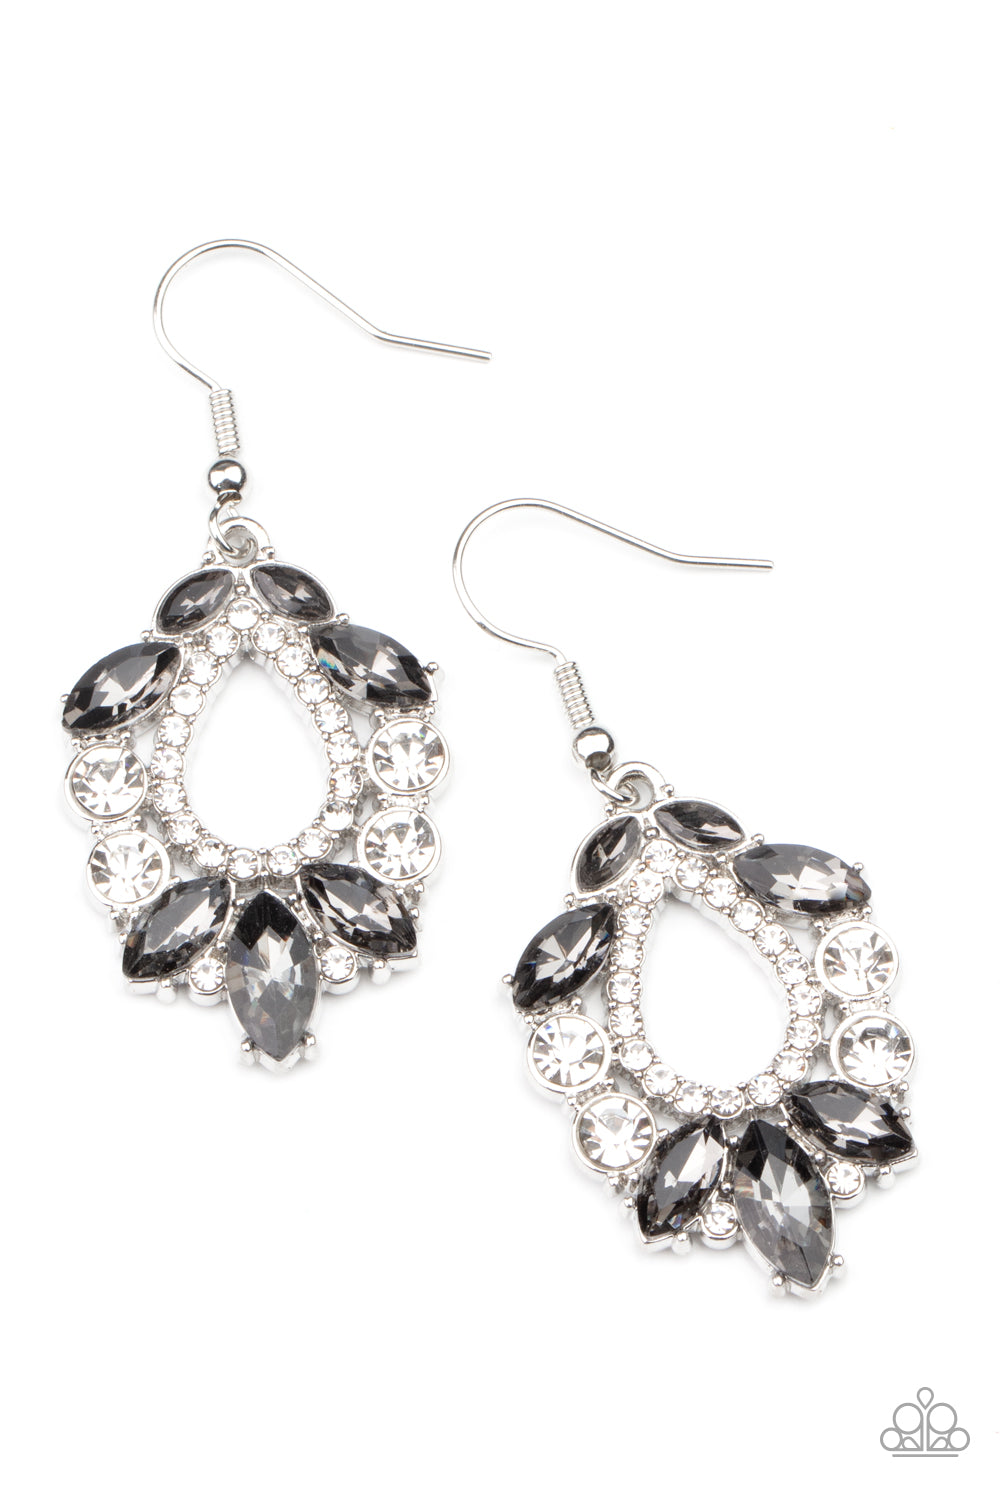 Paparazzi ♥ New Age Noble - Silver ♥ Earrings – LisaAbercrombie